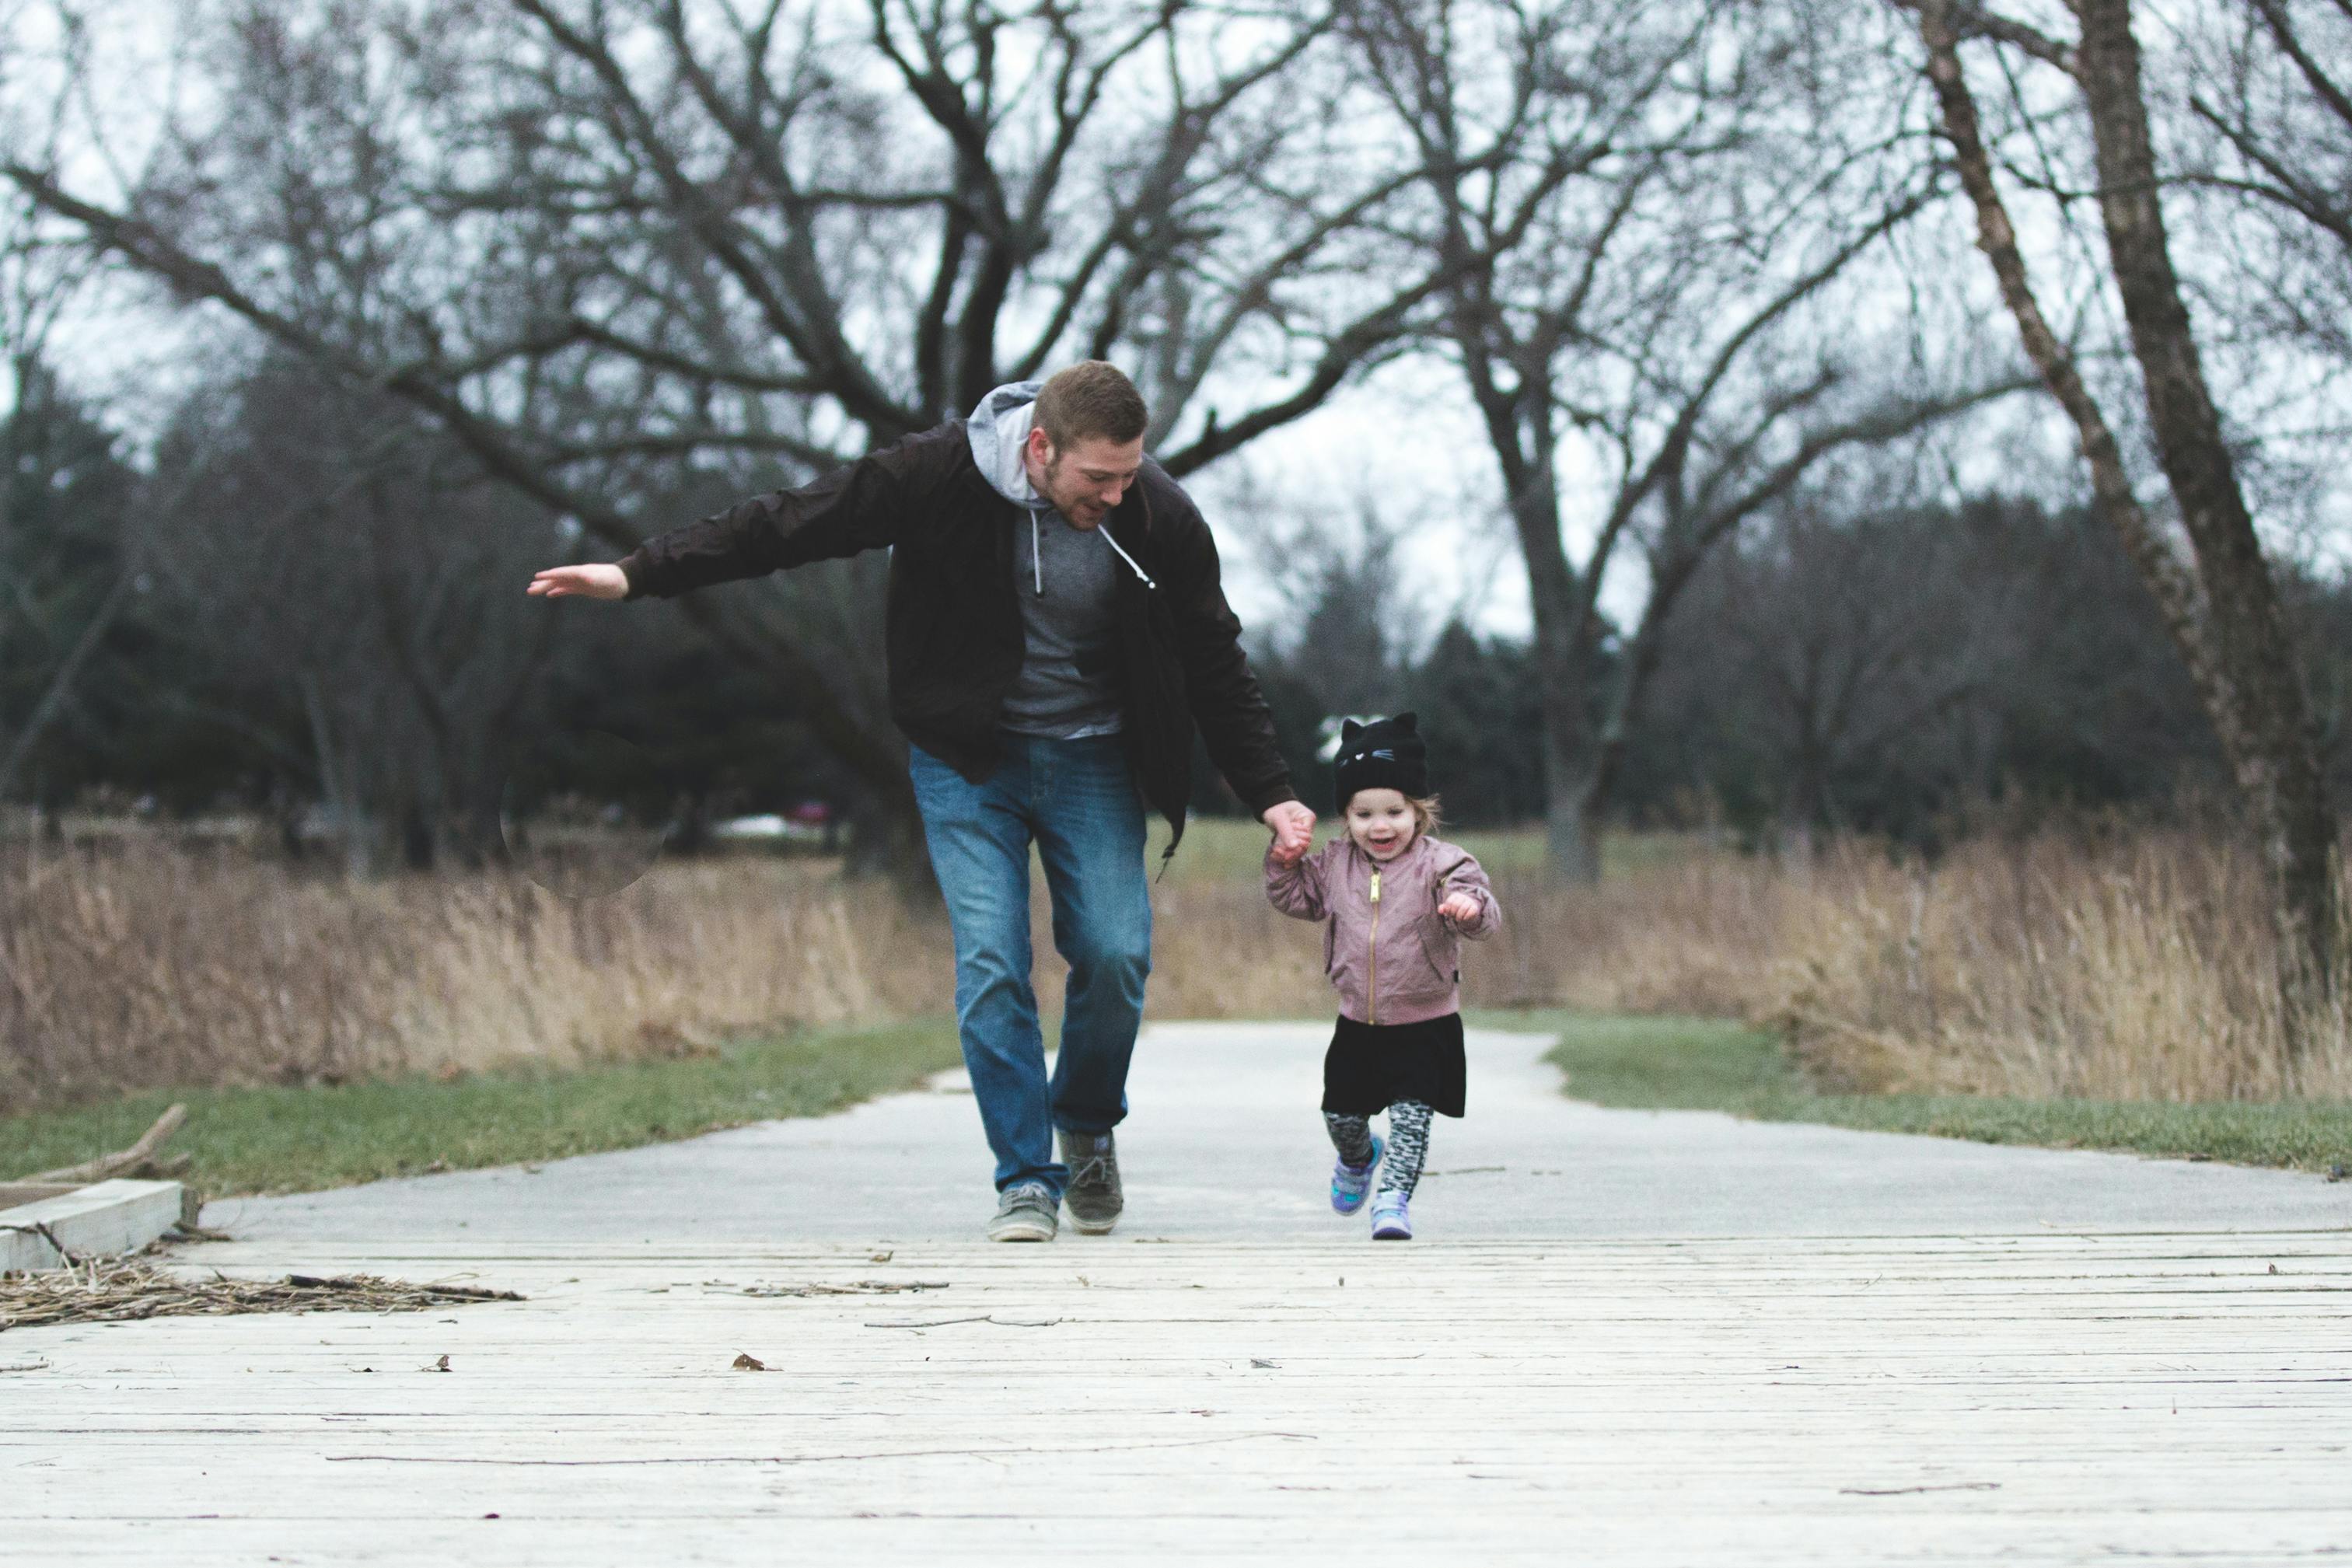 Father and daughter running on asphalt road | Photo: Pexels